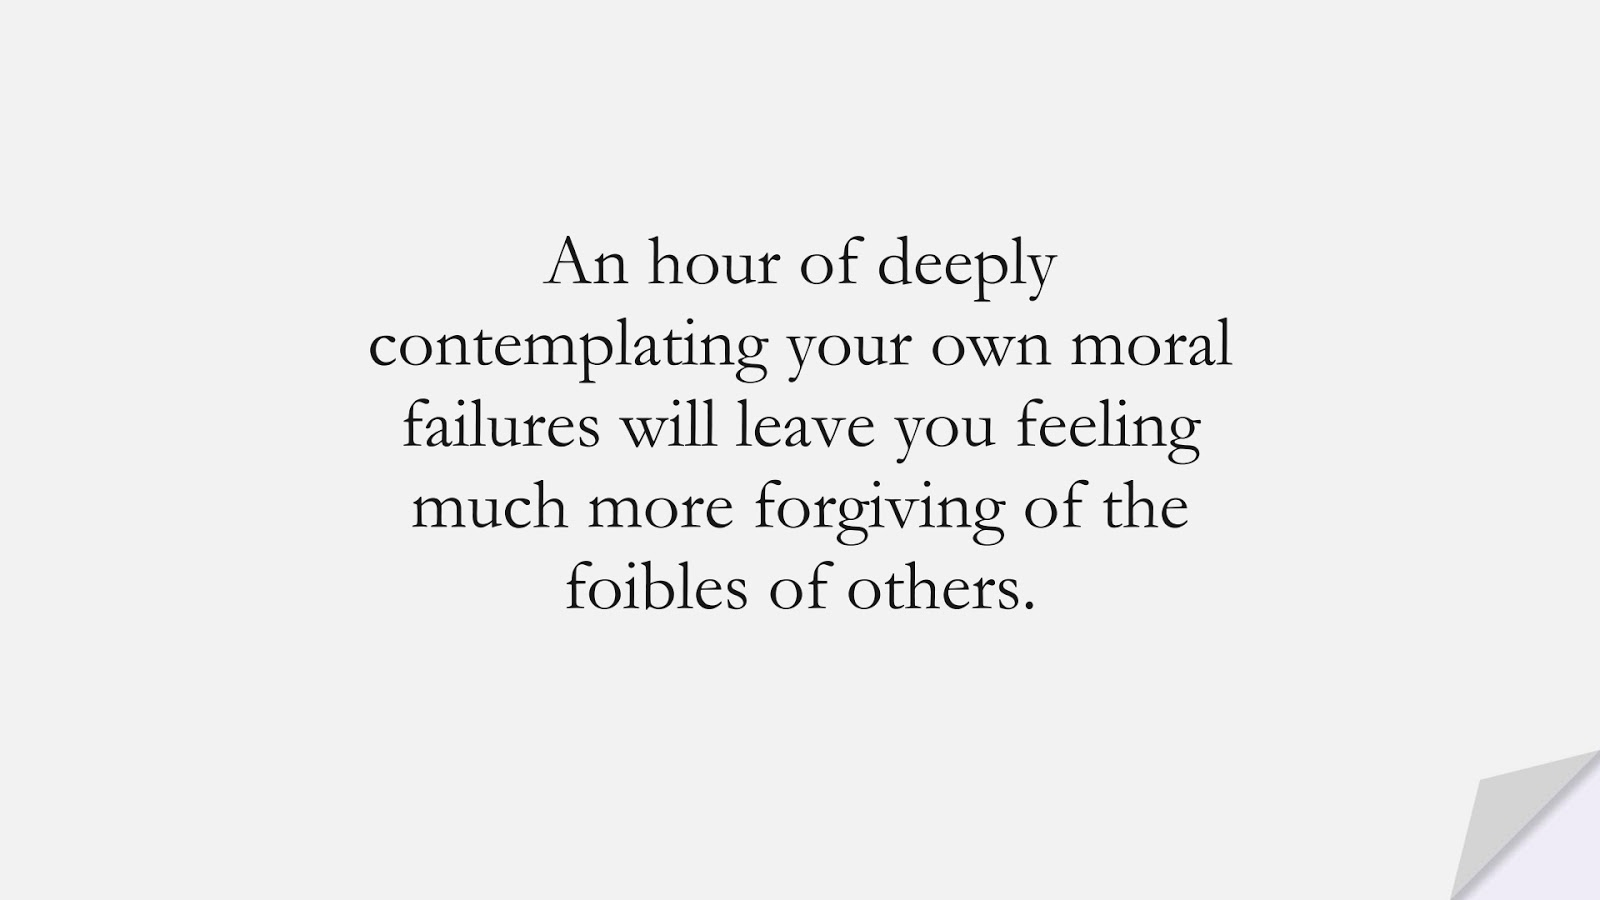 An hour of deeply contemplating your own moral failures will leave you feeling much more forgiving of the foibles of others.FALSE